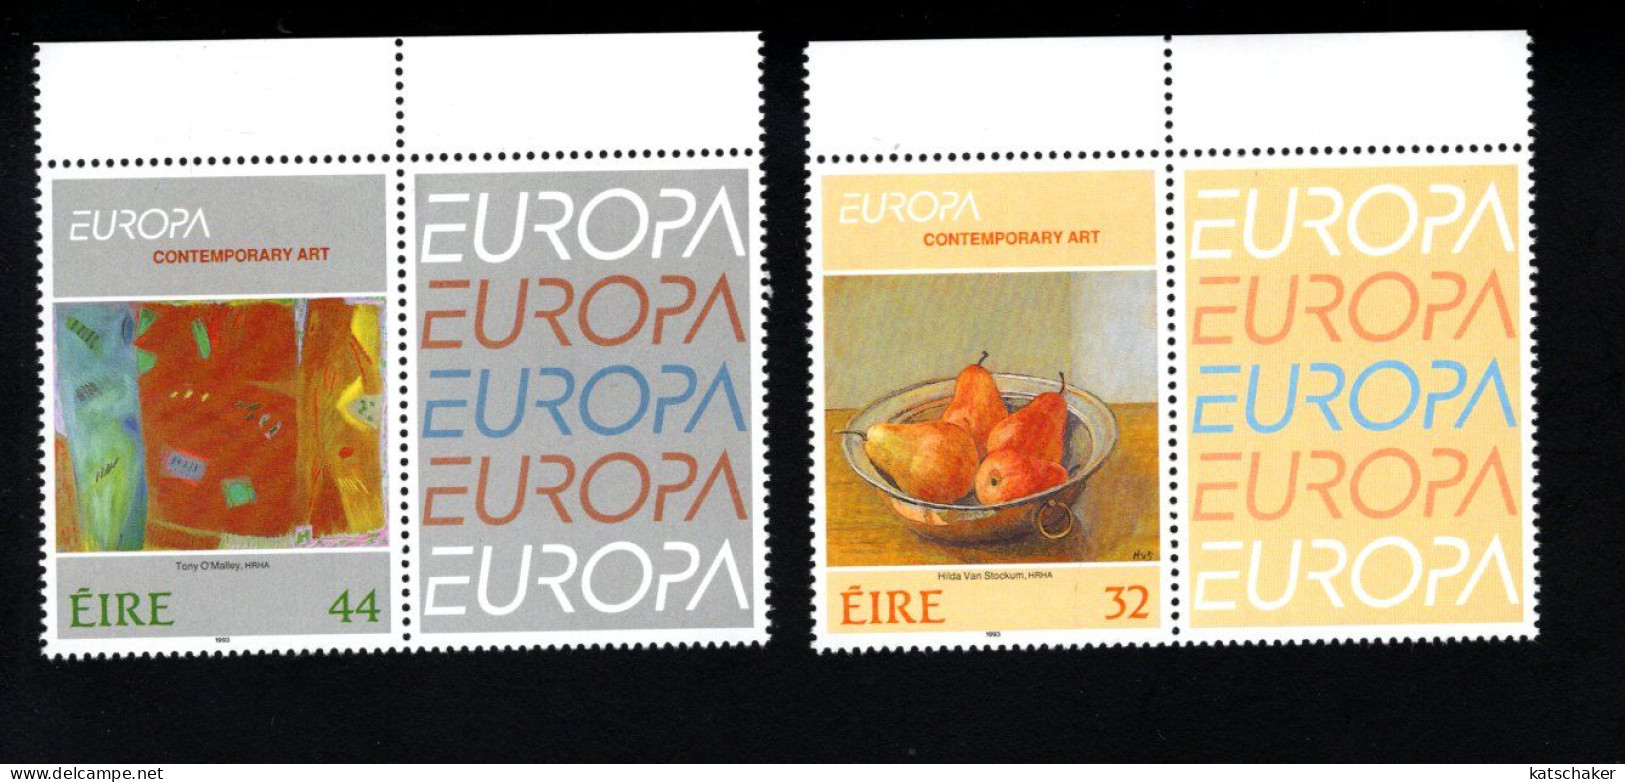 1993956902 1993 SCOTT 895 896  (XX) POSTFRIS MINT NEVER HINGED - EUROPA ISSUE - PAINTINGS COMPTEMORARY ART  LABEL RIGHT - Unused Stamps